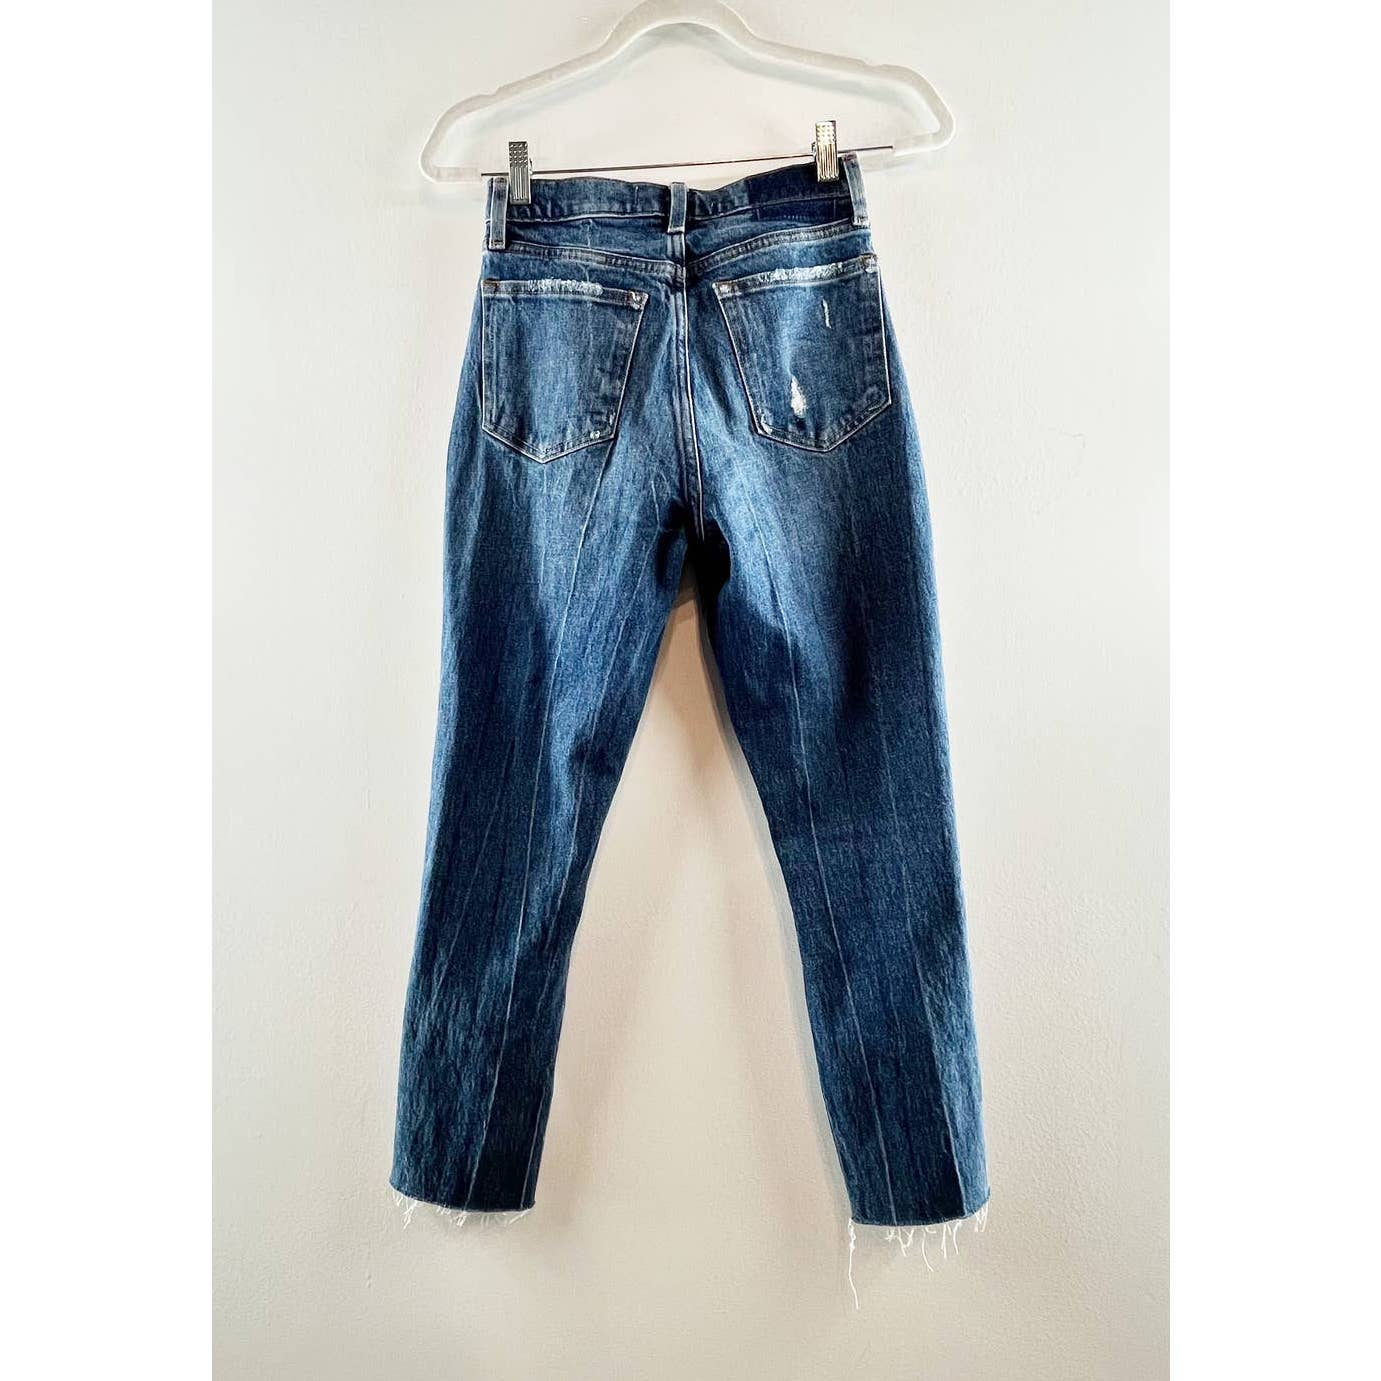 Abercrombie & Fitch Ripped Distressed The High Rise Mom Jeans Denim Blue 25 / 0s